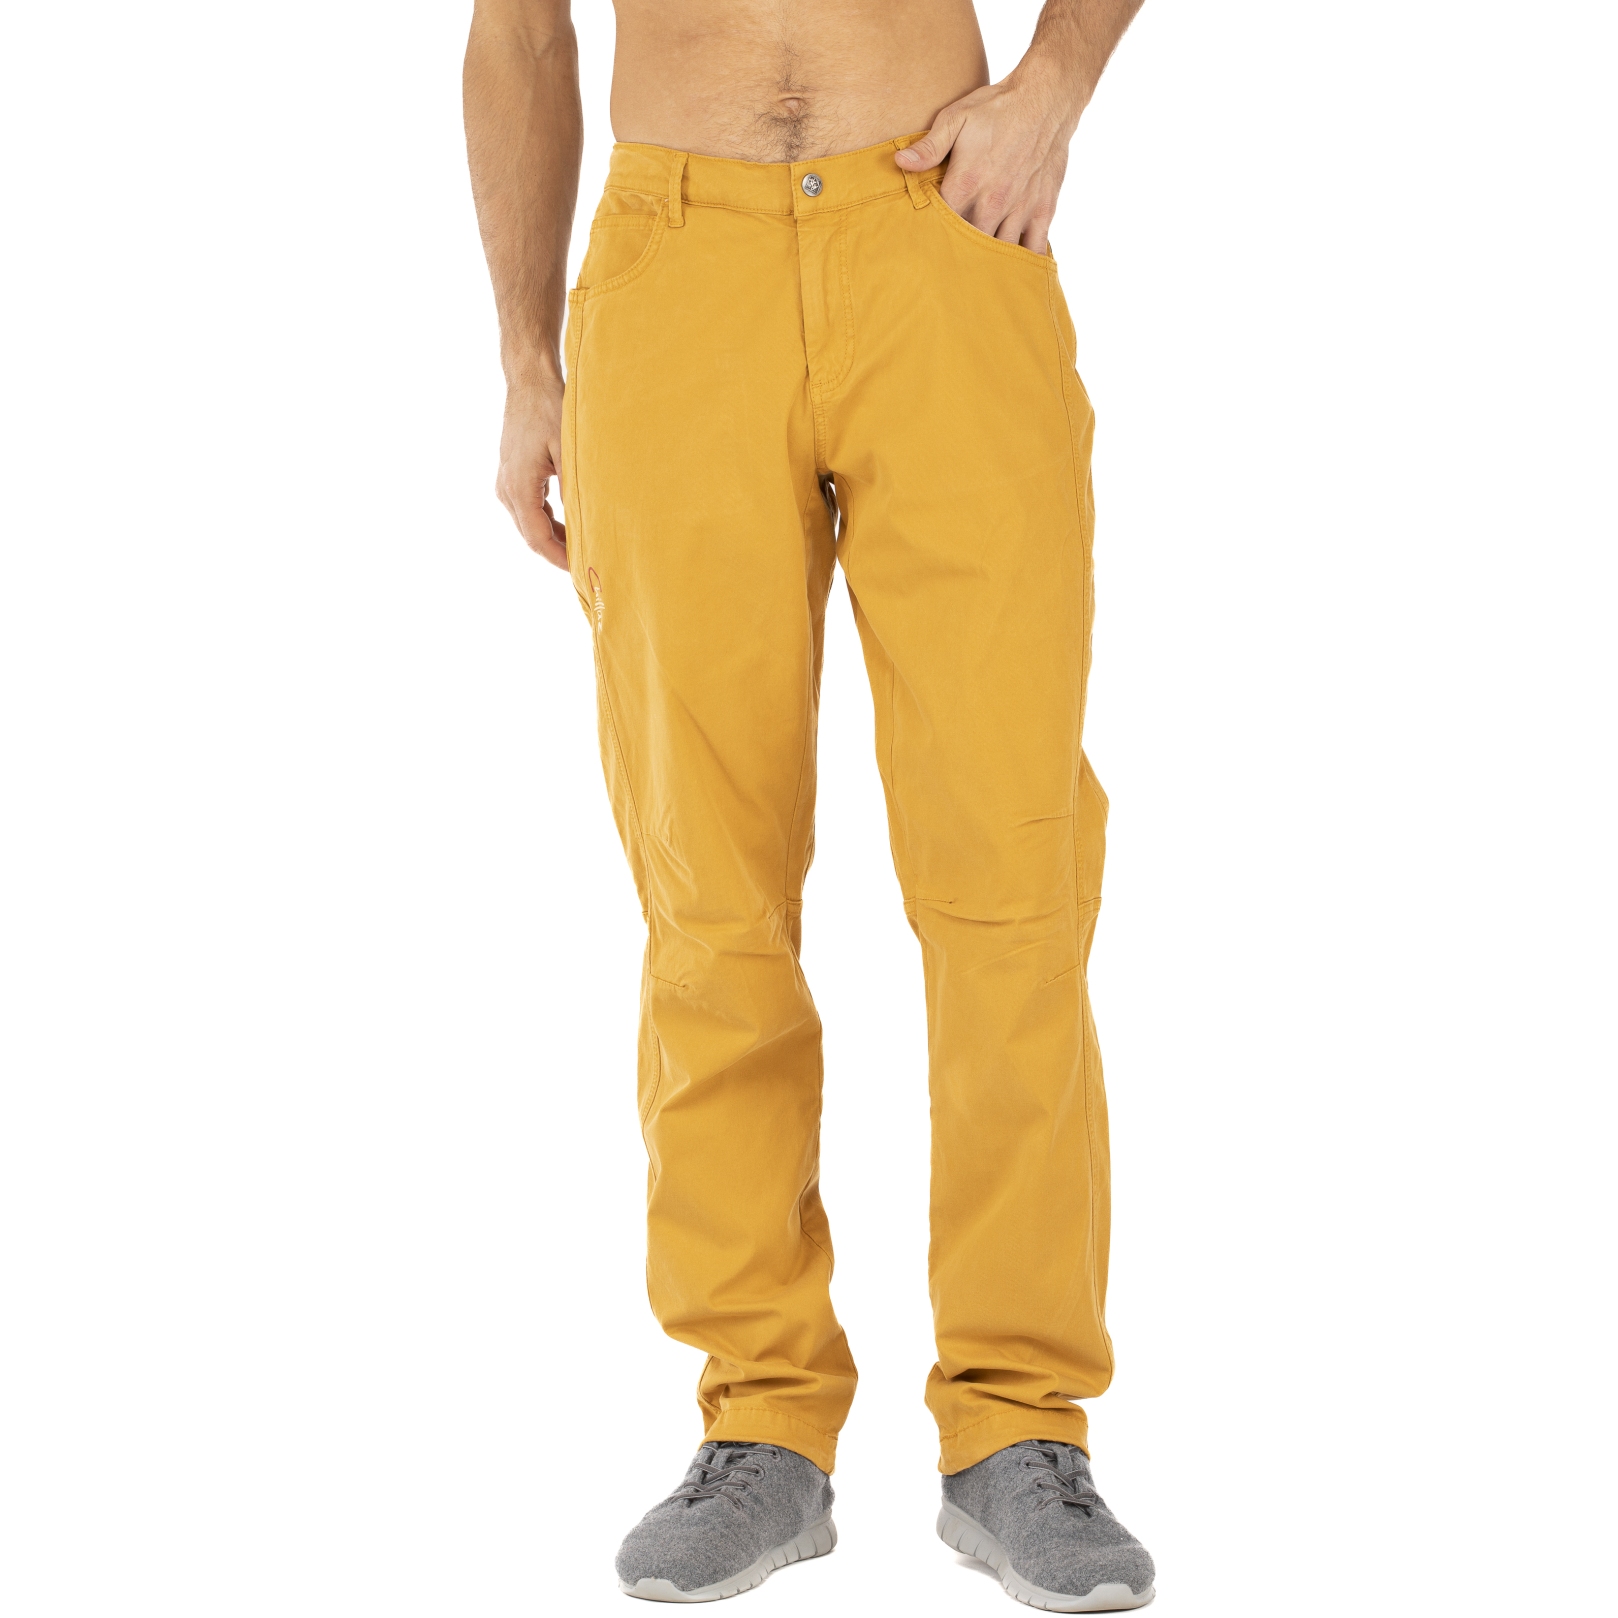 Image of Chillaz Magic Style 3.0 Pants Men - curry